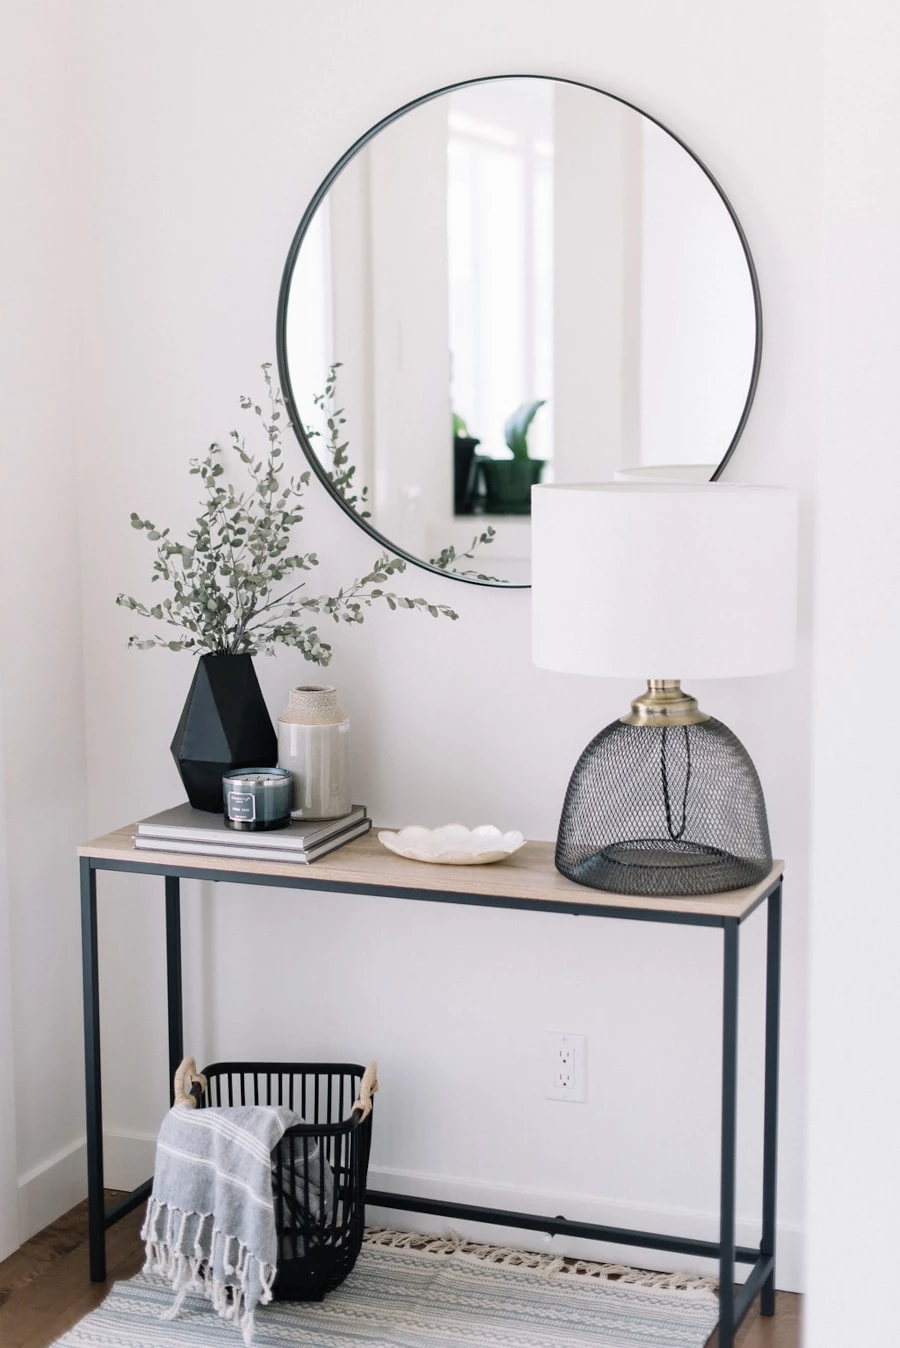 A modern front entryway using black accents on a slim table. Black framed circular mirror hangs above the table.